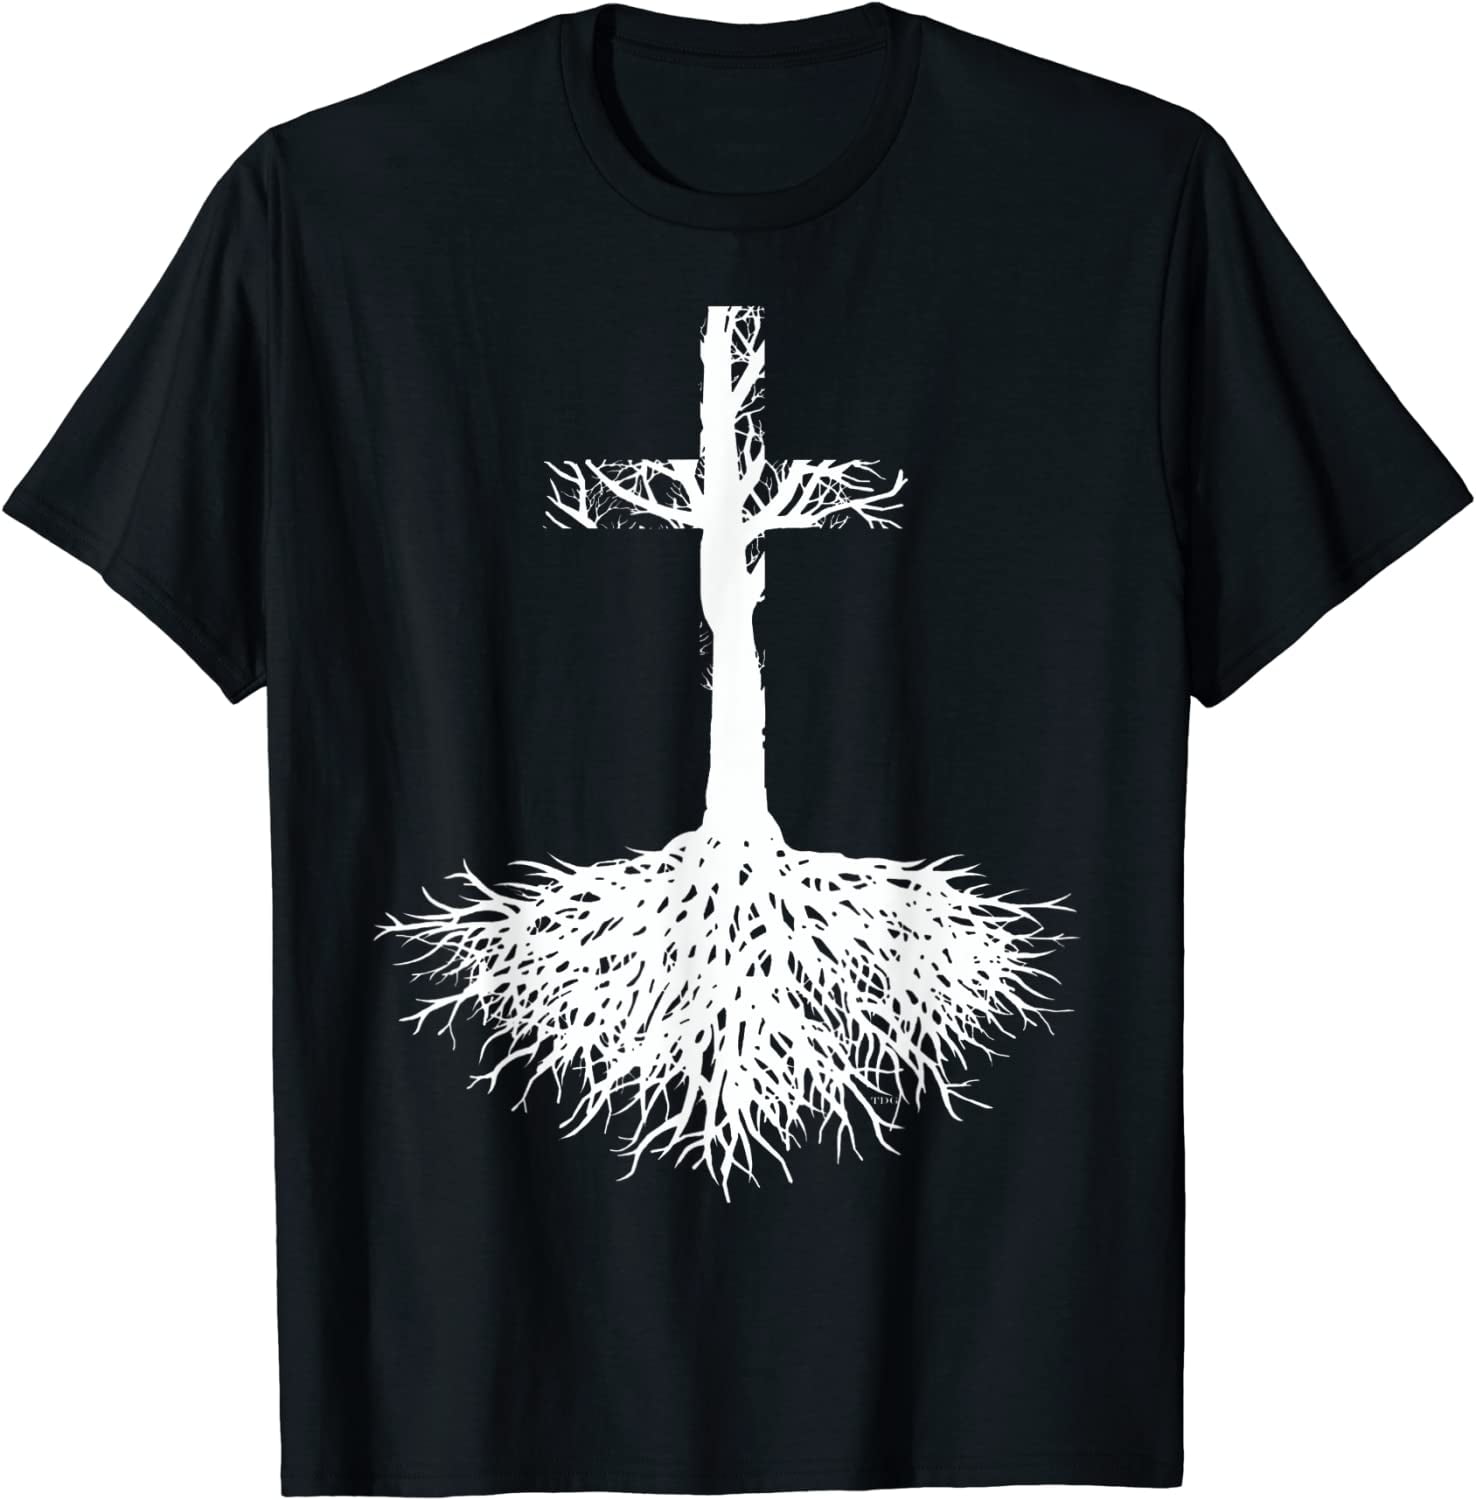 Faith-Filled Threads: Embrace Your Belief with Our Jesus Christ T-Shirt ...